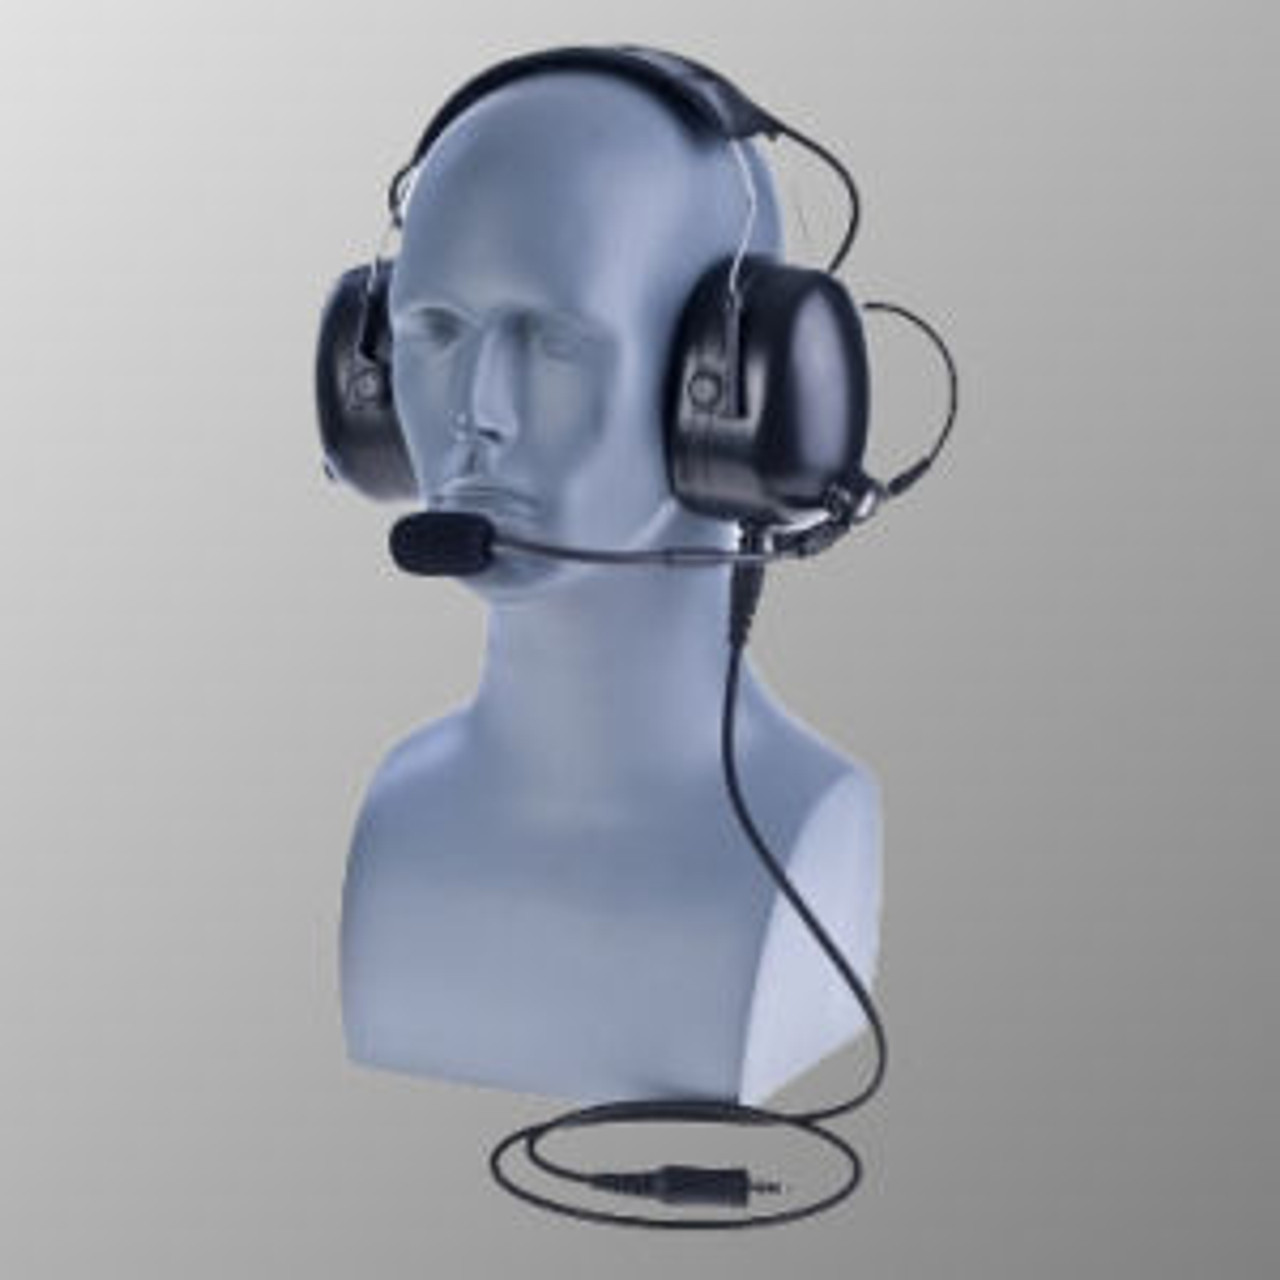 Motorola XPR6580 Over The Head Double Muff Headset With WIreless PTT